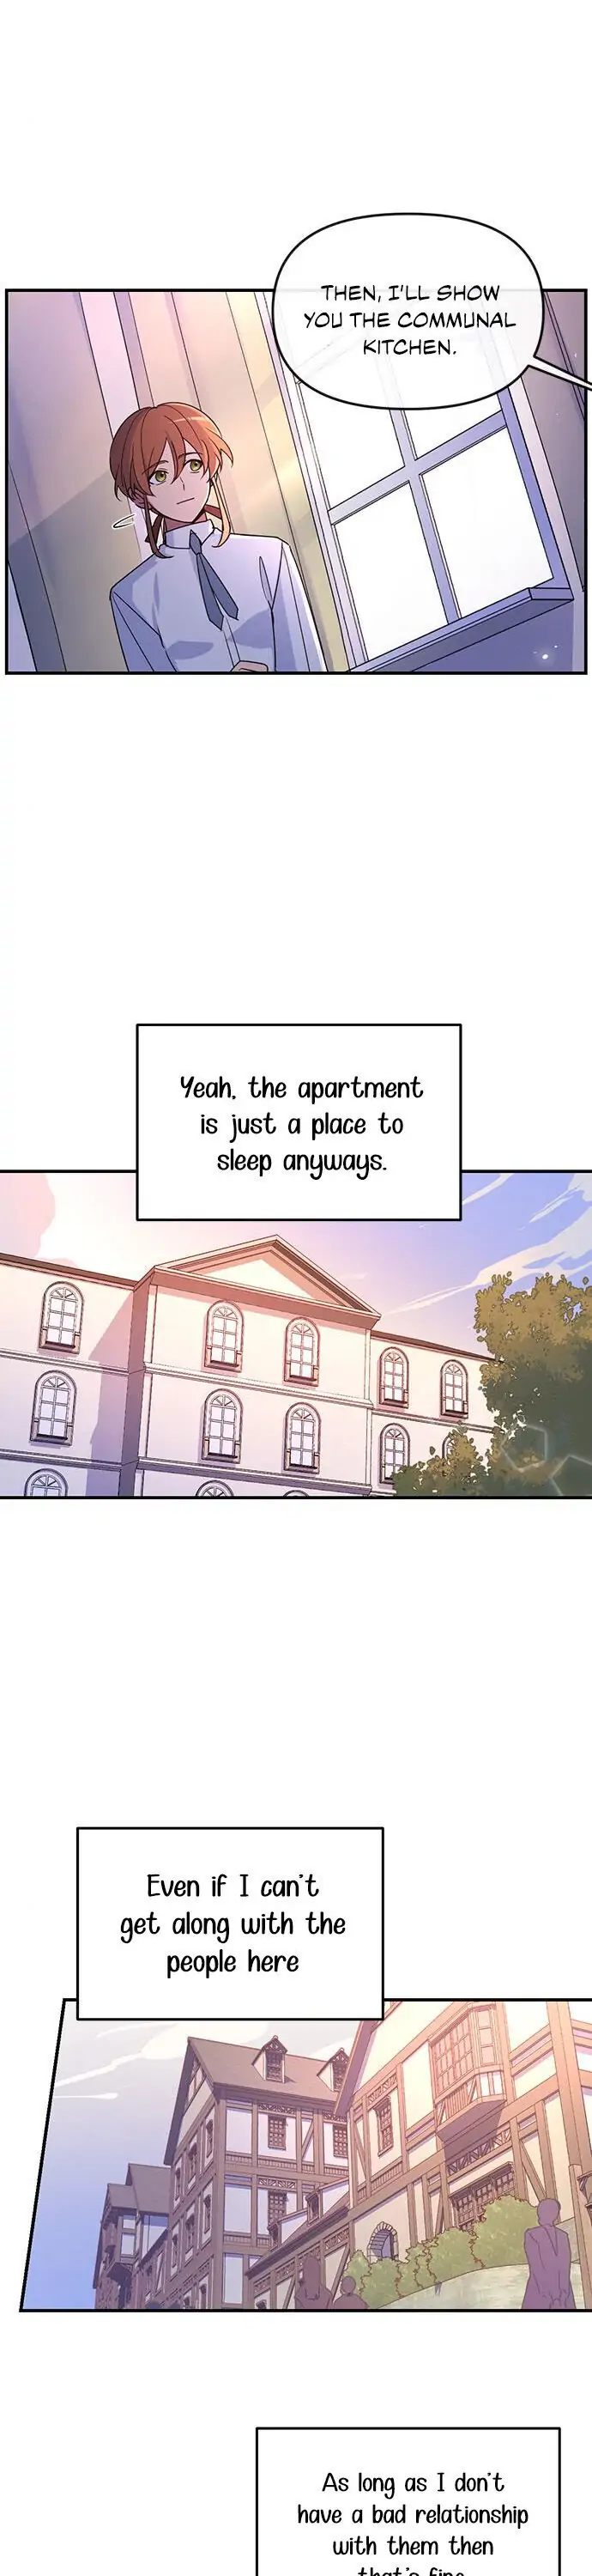 Single Wizard’s Dormitory Apartment chapter 2